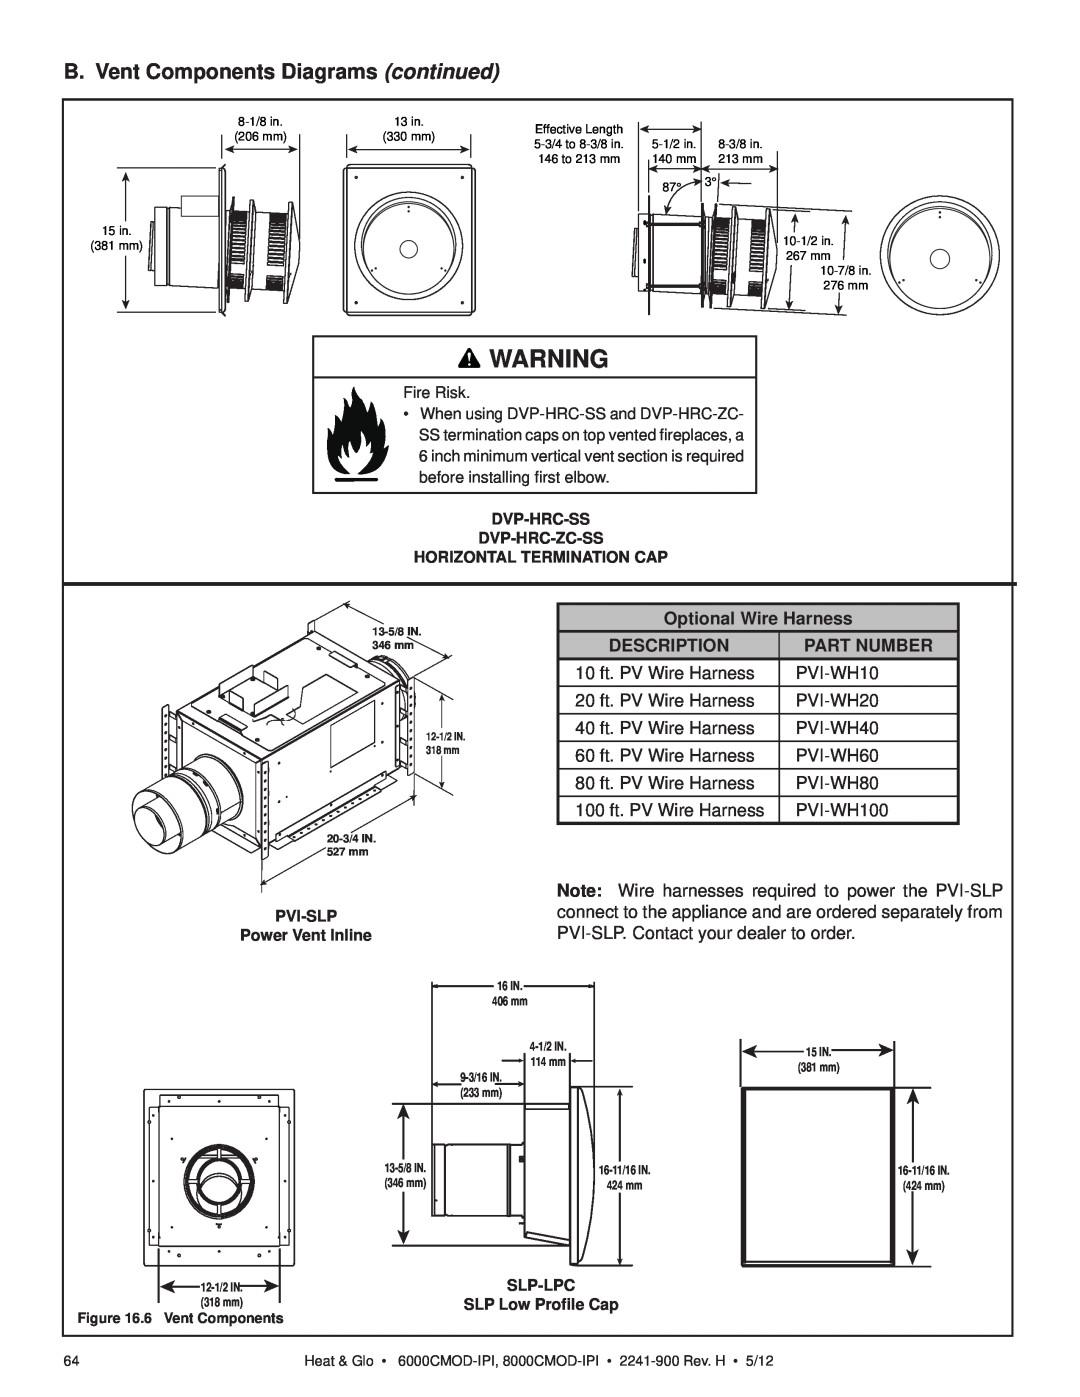 Heat & Glo LifeStyle 8000CMOD-IPI B. Vent Components Diagrams continued, Optional Wire Harness, Description, Part Number 